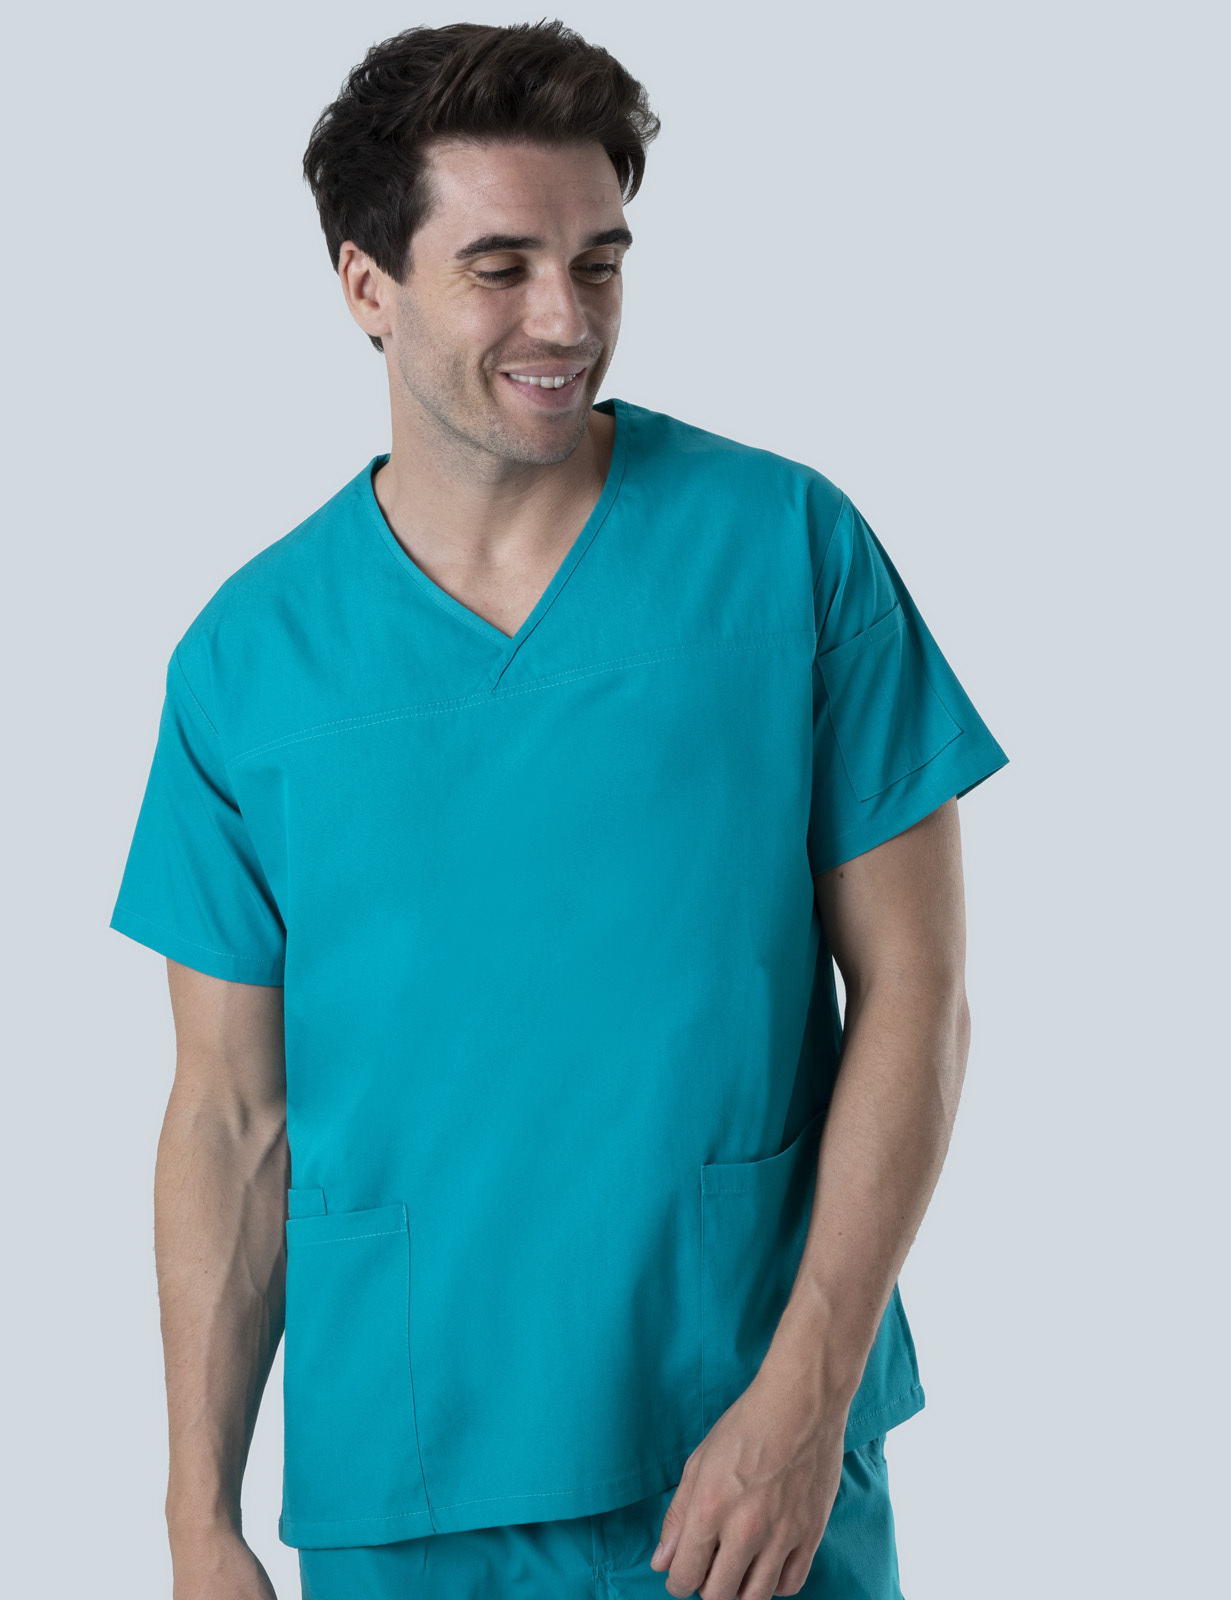 Men's Fit Solid Scrub Top - Teal - XX Small